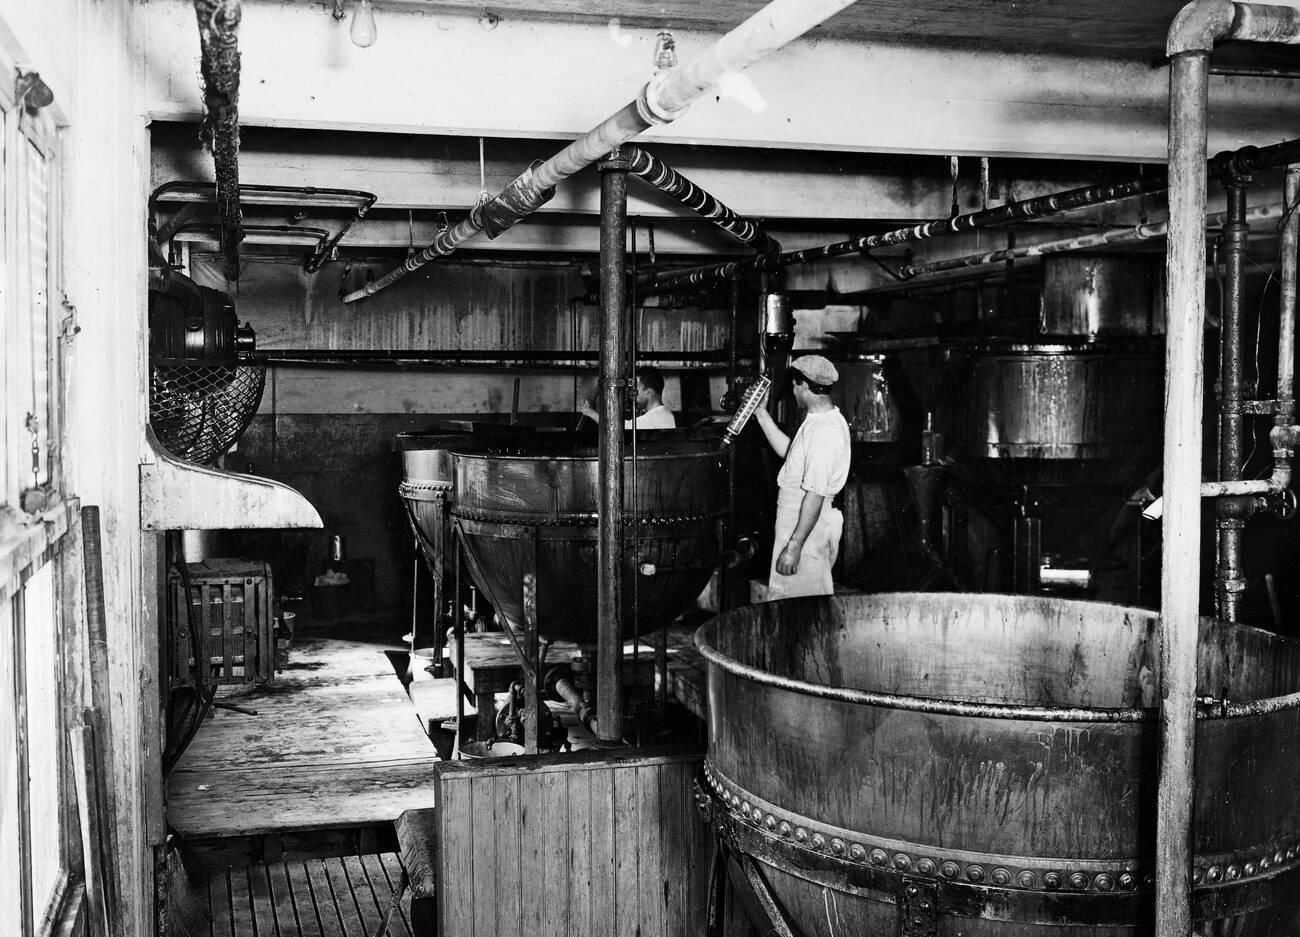 Making Cream At E. Greenfield'S Sons, Brooklyn, 1900S